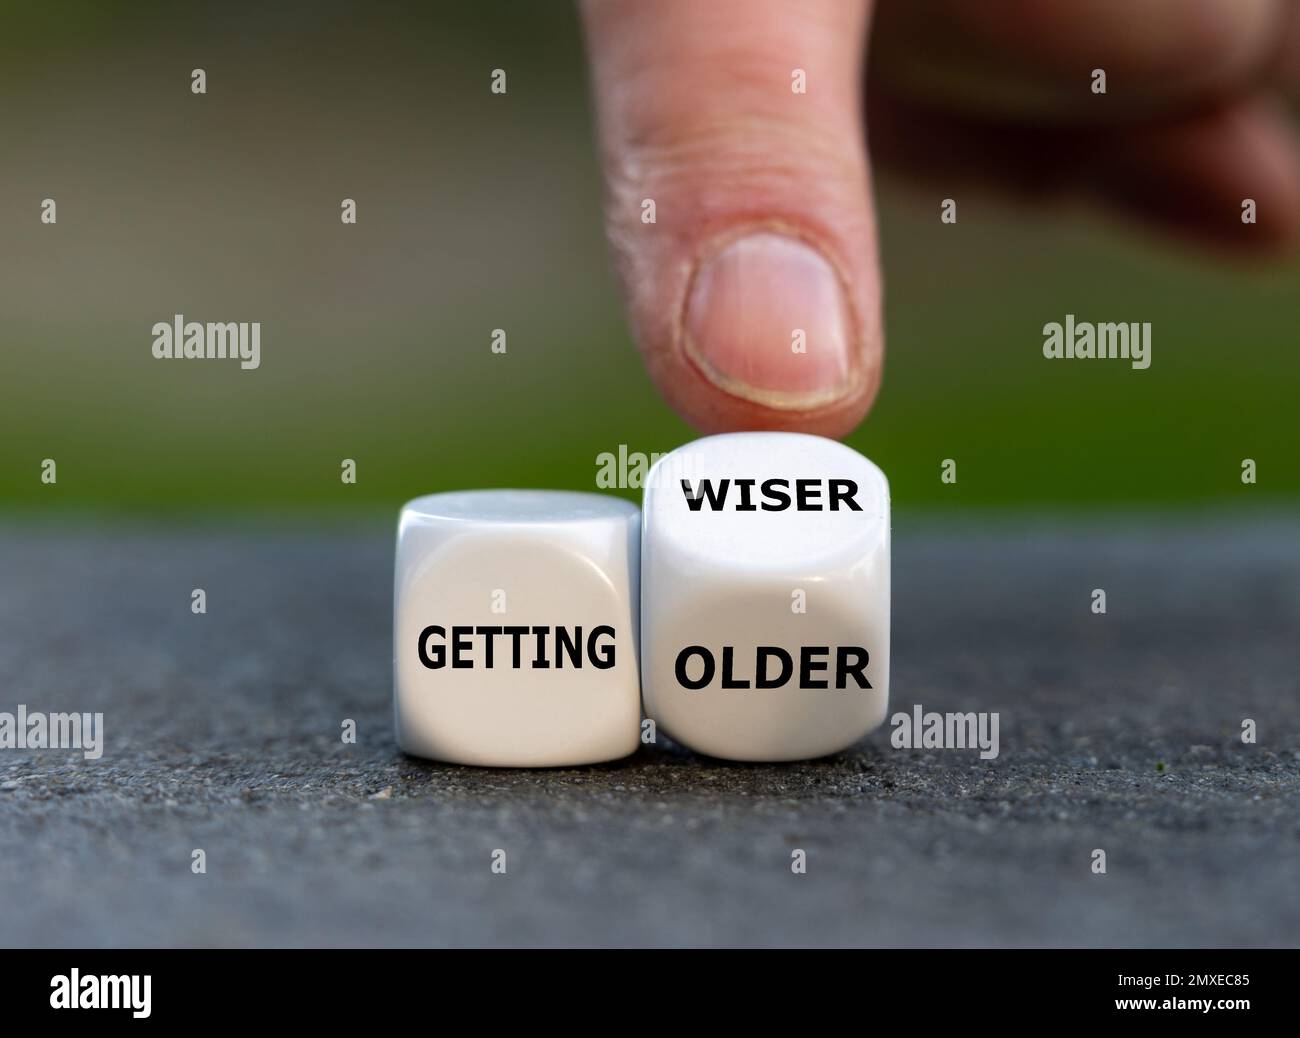 Hand turns dice and changes the expression 'getting older' to 'getting wiser'. Stock Photo